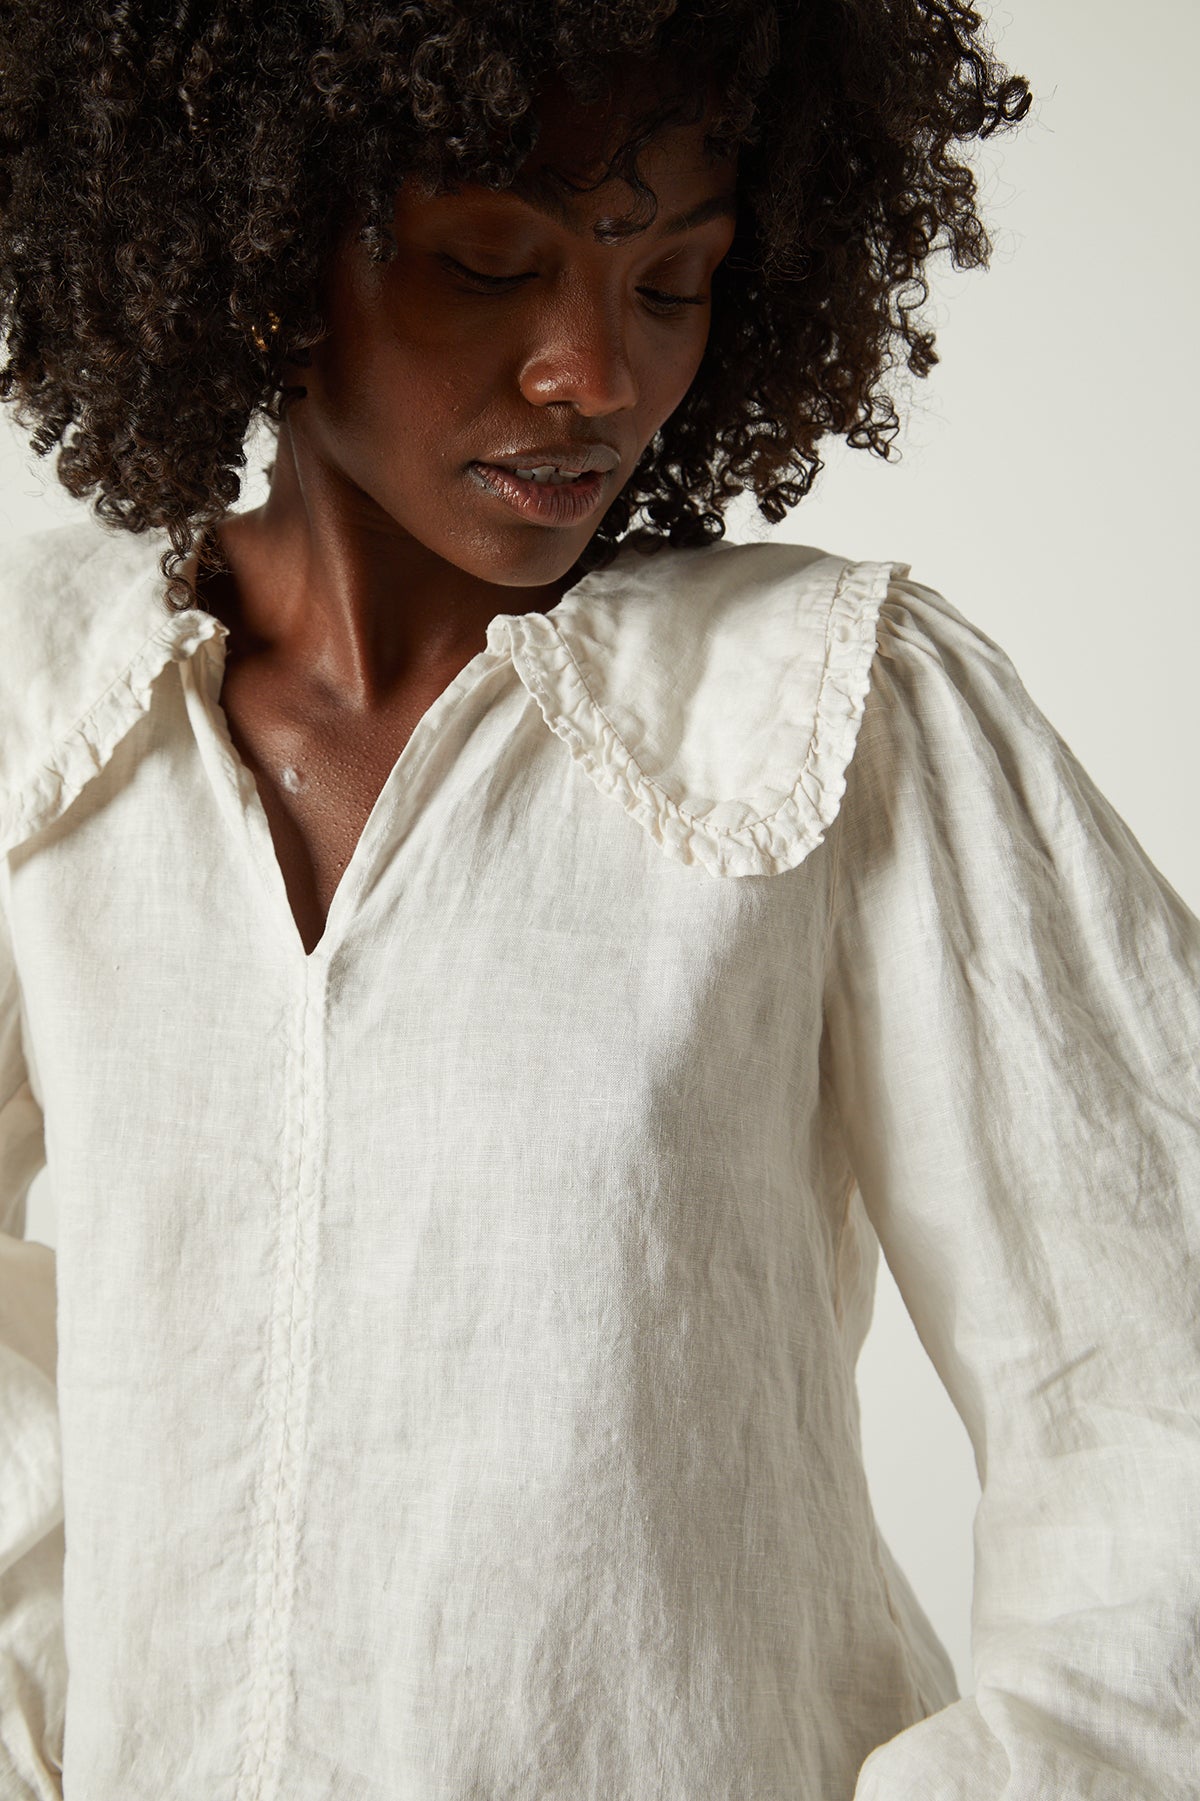 Sofia linen top in beach close up front detail-26079070421185